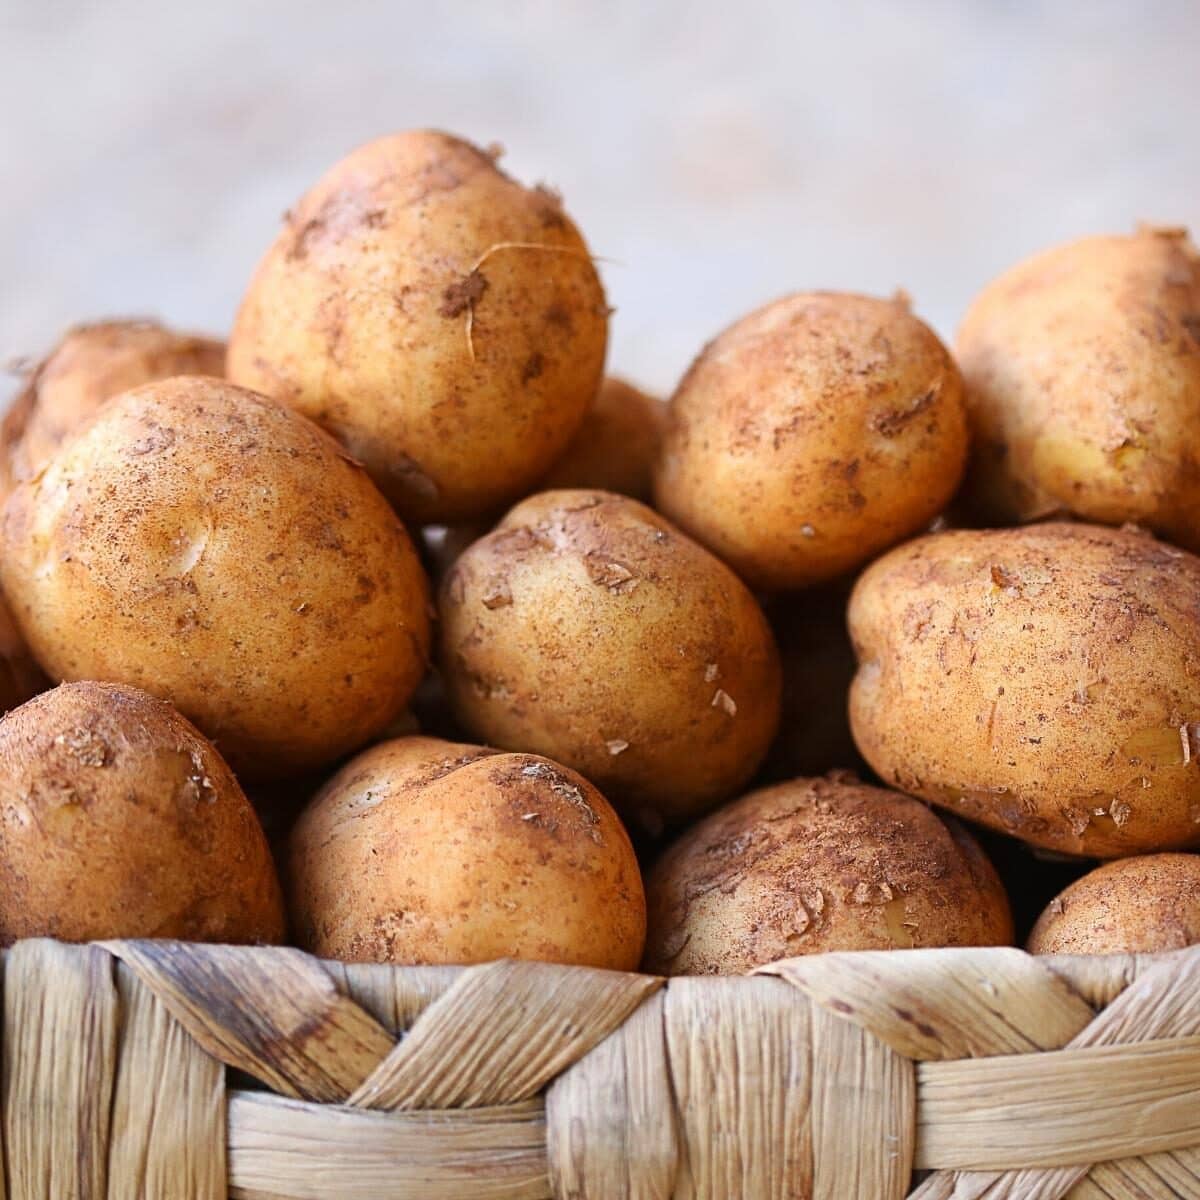 How To Store Potatoes In Pantry